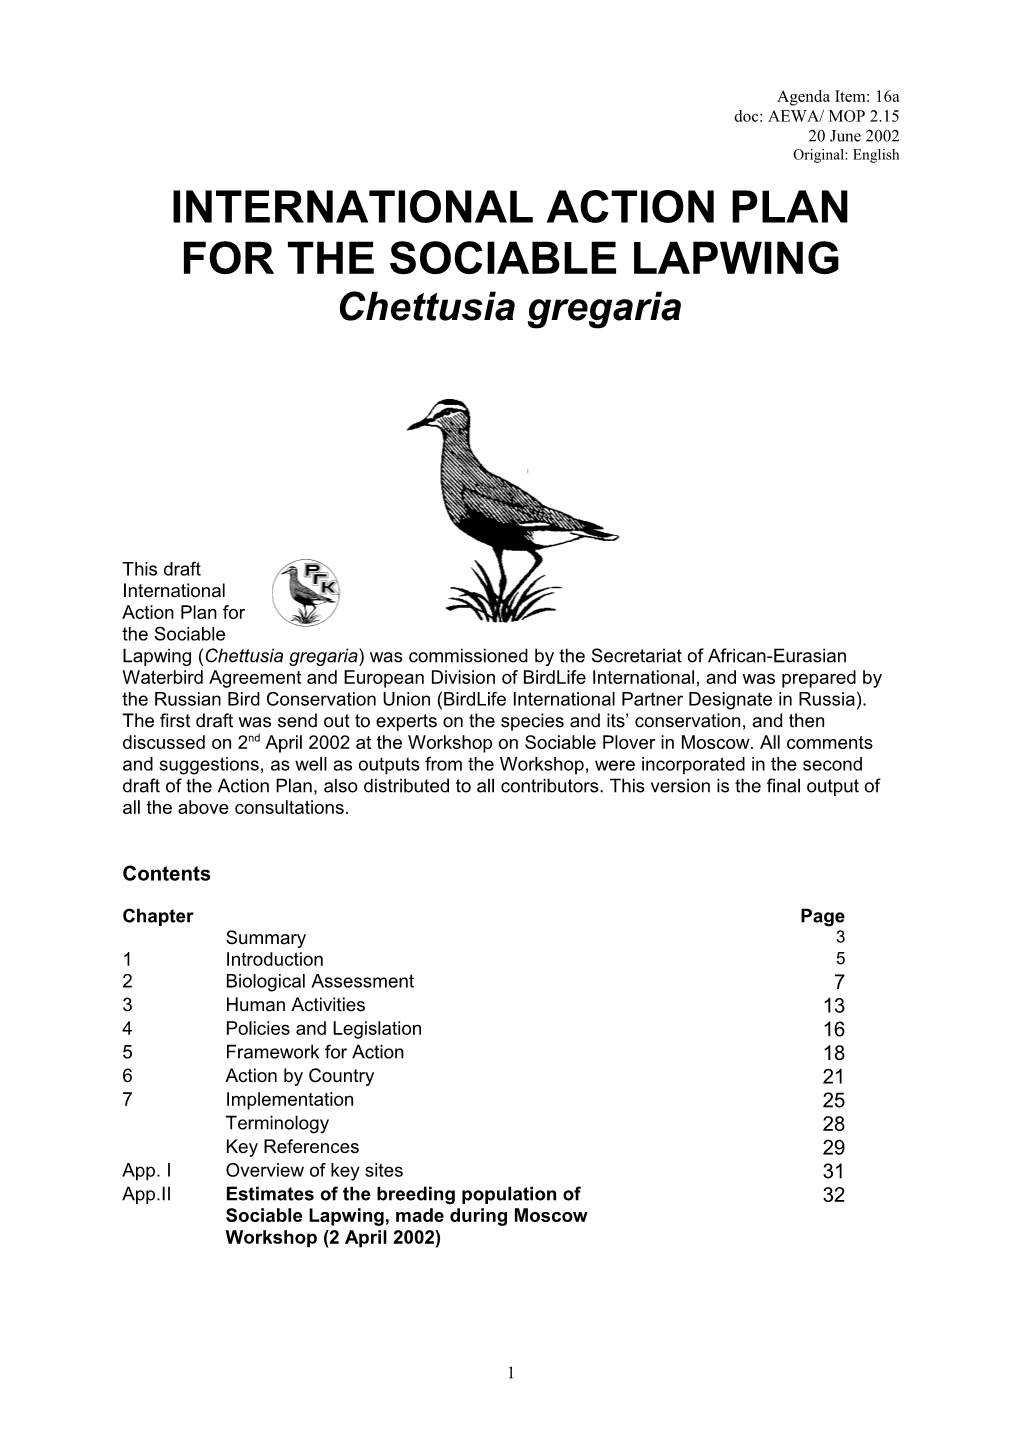 Action Plan for Sociable Lapwing